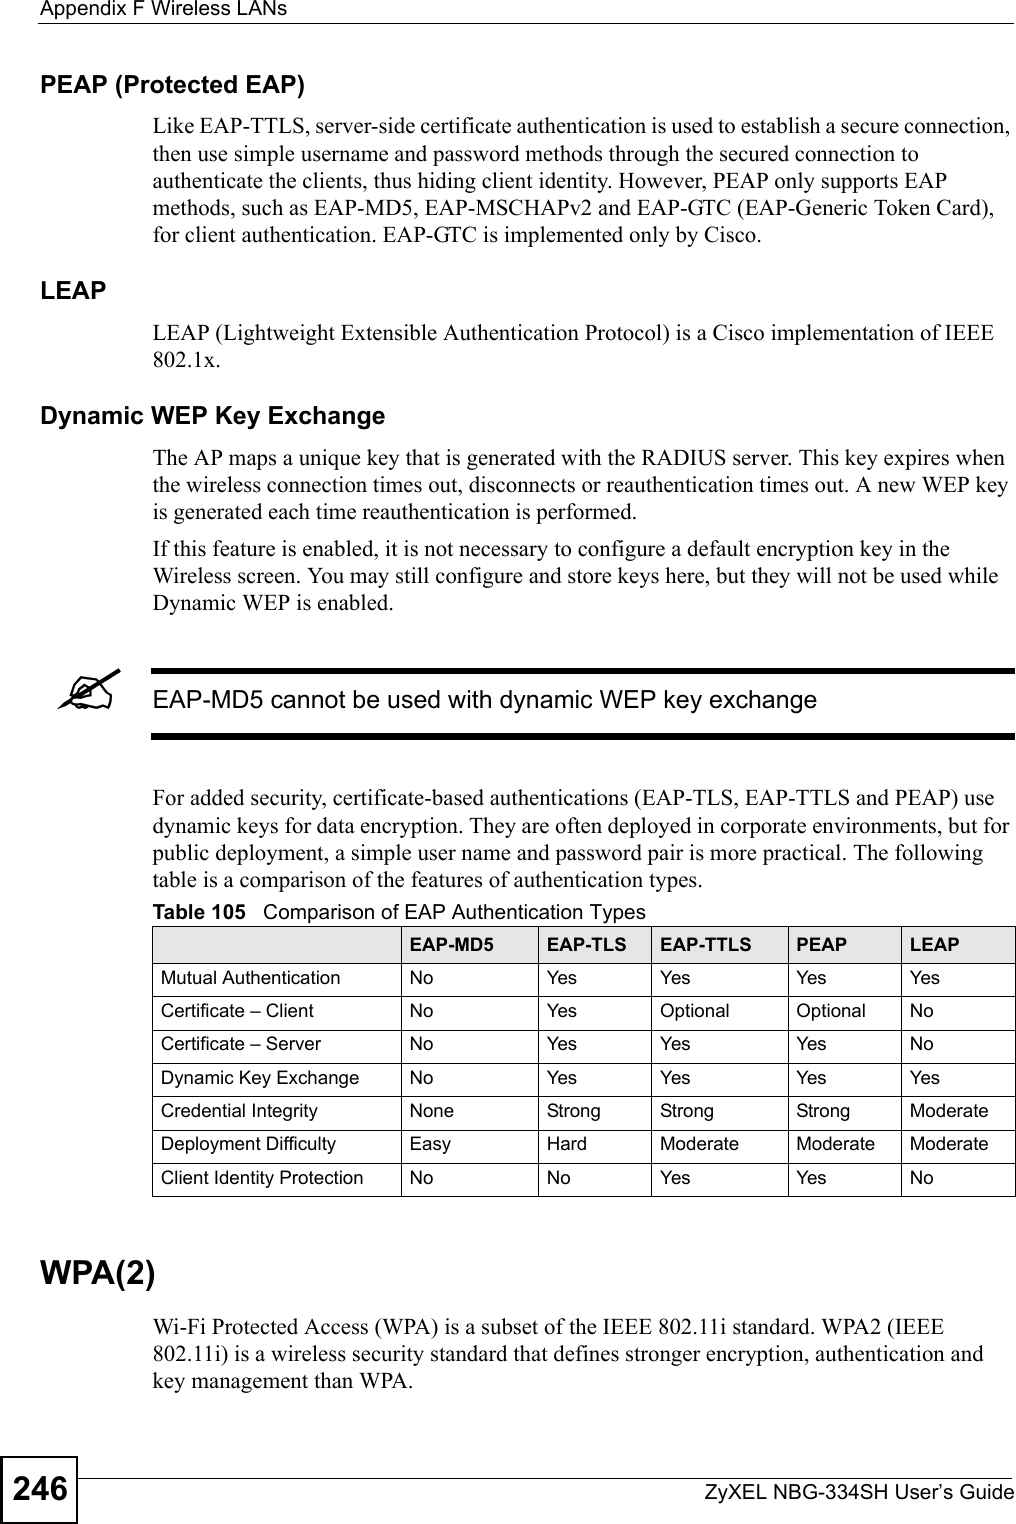 Appendix F Wireless LANsZyXEL NBG-334SH User’s Guide246PEAP (Protected EAP)   Like EAP-TTLS, server-side certificate authentication is used to establish a secure connection, then use simple username and password methods through the secured connection to authenticate the clients, thus hiding client identity. However, PEAP only supports EAP methods, such as EAP-MD5, EAP-MSCHAPv2 and EAP-GTC (EAP-Generic Token Card), for client authentication. EAP-GTC is implemented only by Cisco.LEAPLEAP (Lightweight Extensible Authentication Protocol) is a Cisco implementation of IEEE 802.1x. Dynamic WEP Key ExchangeThe AP maps a unique key that is generated with the RADIUS server. This key expires when the wireless connection times out, disconnects or reauthentication times out. A new WEP key is generated each time reauthentication is performed.If this feature is enabled, it is not necessary to configure a default encryption key in the Wireless screen. You may still configure and store keys here, but they will not be used while Dynamic WEP is enabled.&quot;EAP-MD5 cannot be used with dynamic WEP key exchangeFor added security, certificate-based authentications (EAP-TLS, EAP-TTLS and PEAP) use dynamic keys for data encryption. They are often deployed in corporate environments, but for public deployment, a simple user name and password pair is more practical. The following table is a comparison of the features of authentication types.WPA(2)Wi-Fi Protected Access (WPA) is a subset of the IEEE 802.11i standard. WPA2 (IEEE 802.11i) is a wireless security standard that defines stronger encryption, authentication and key management than WPA. Table 105   Comparison of EAP Authentication TypesEAP-MD5 EAP-TLS EAP-TTLS PEAP LEAPMutual Authentication No Yes Yes Yes YesCertificate – Client No Yes Optional Optional NoCertificate – Server No Yes Yes Yes NoDynamic Key Exchange No Yes Yes Yes YesCredential Integrity None Strong Strong Strong ModerateDeployment Difficulty Easy Hard Moderate Moderate ModerateClient Identity Protection No No Yes Yes No